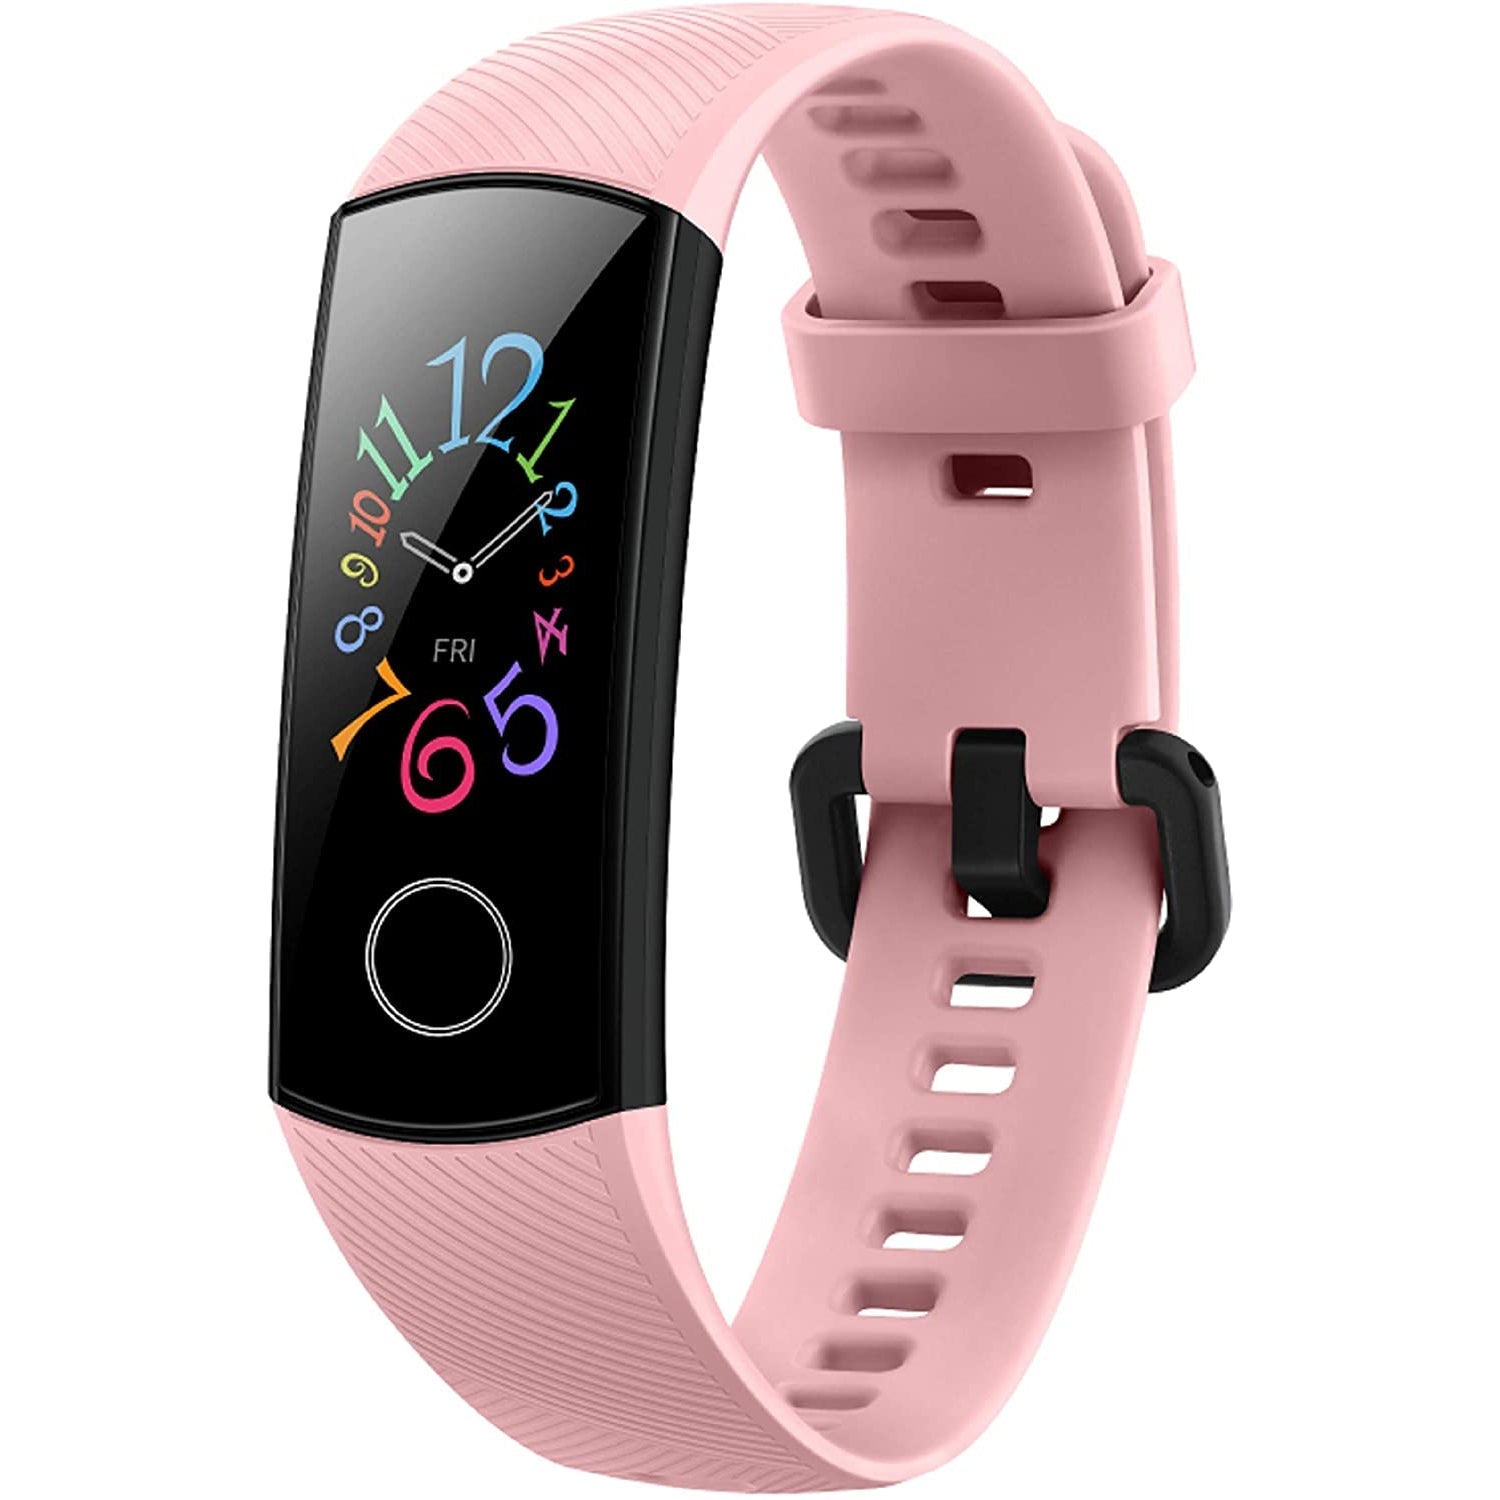 HONOR Band 5 Fitness Tracker with SpO2 Heart Rate and Sleep Monitor - Coral Pink - Refurbished Pristine